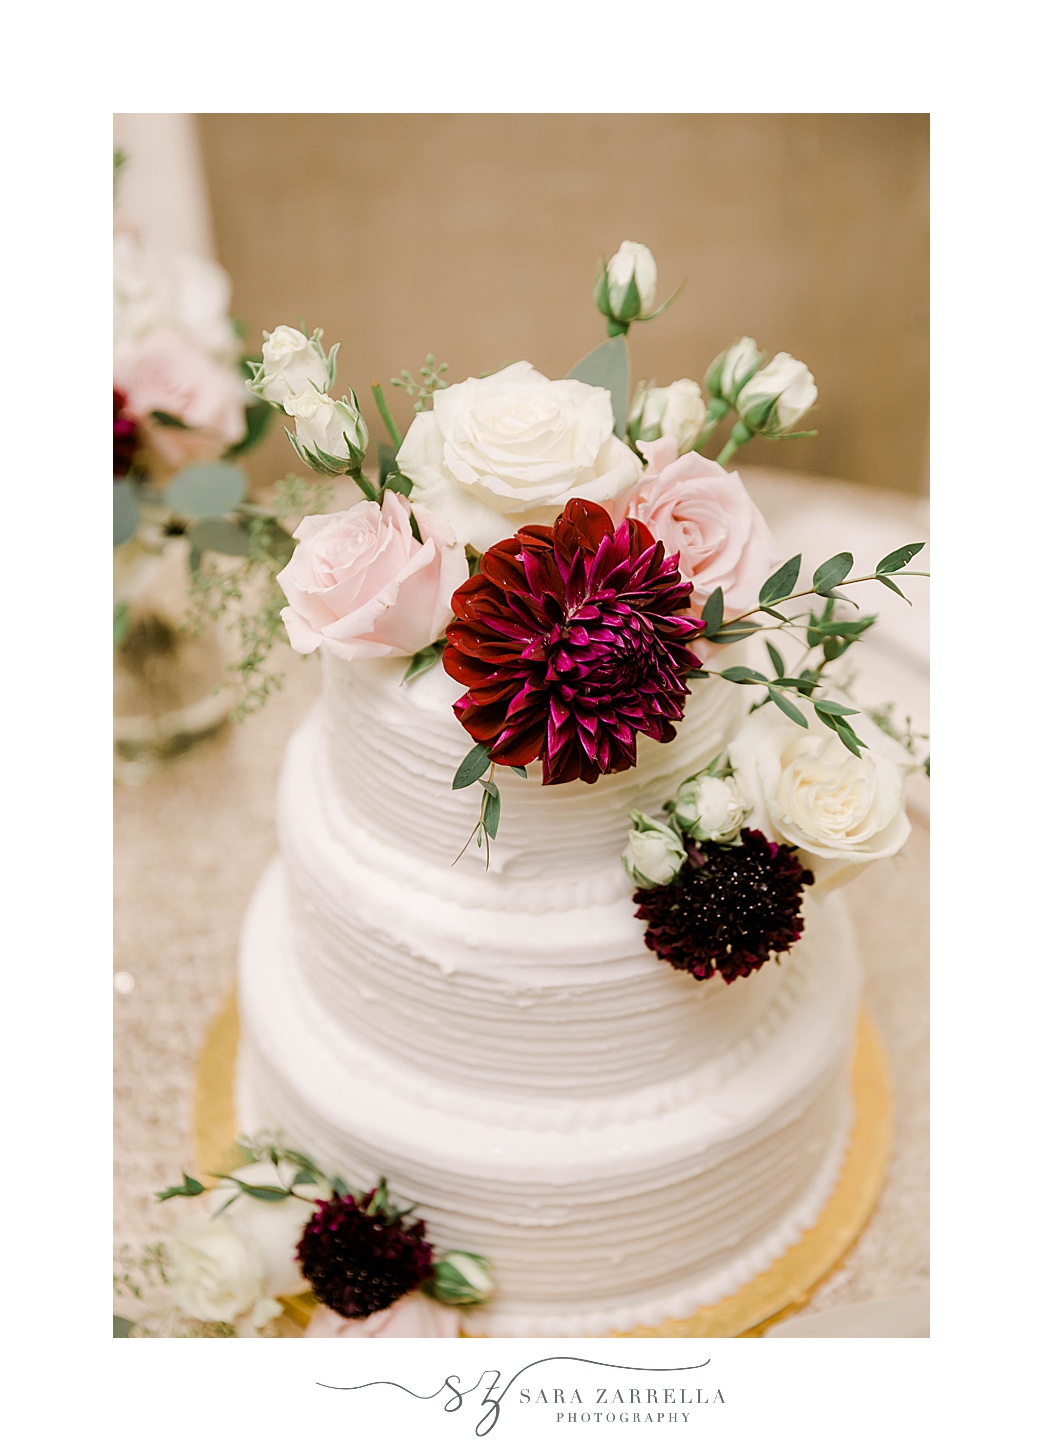 wedding cake with fall flowers on top at Atlantic Resort Wyndham